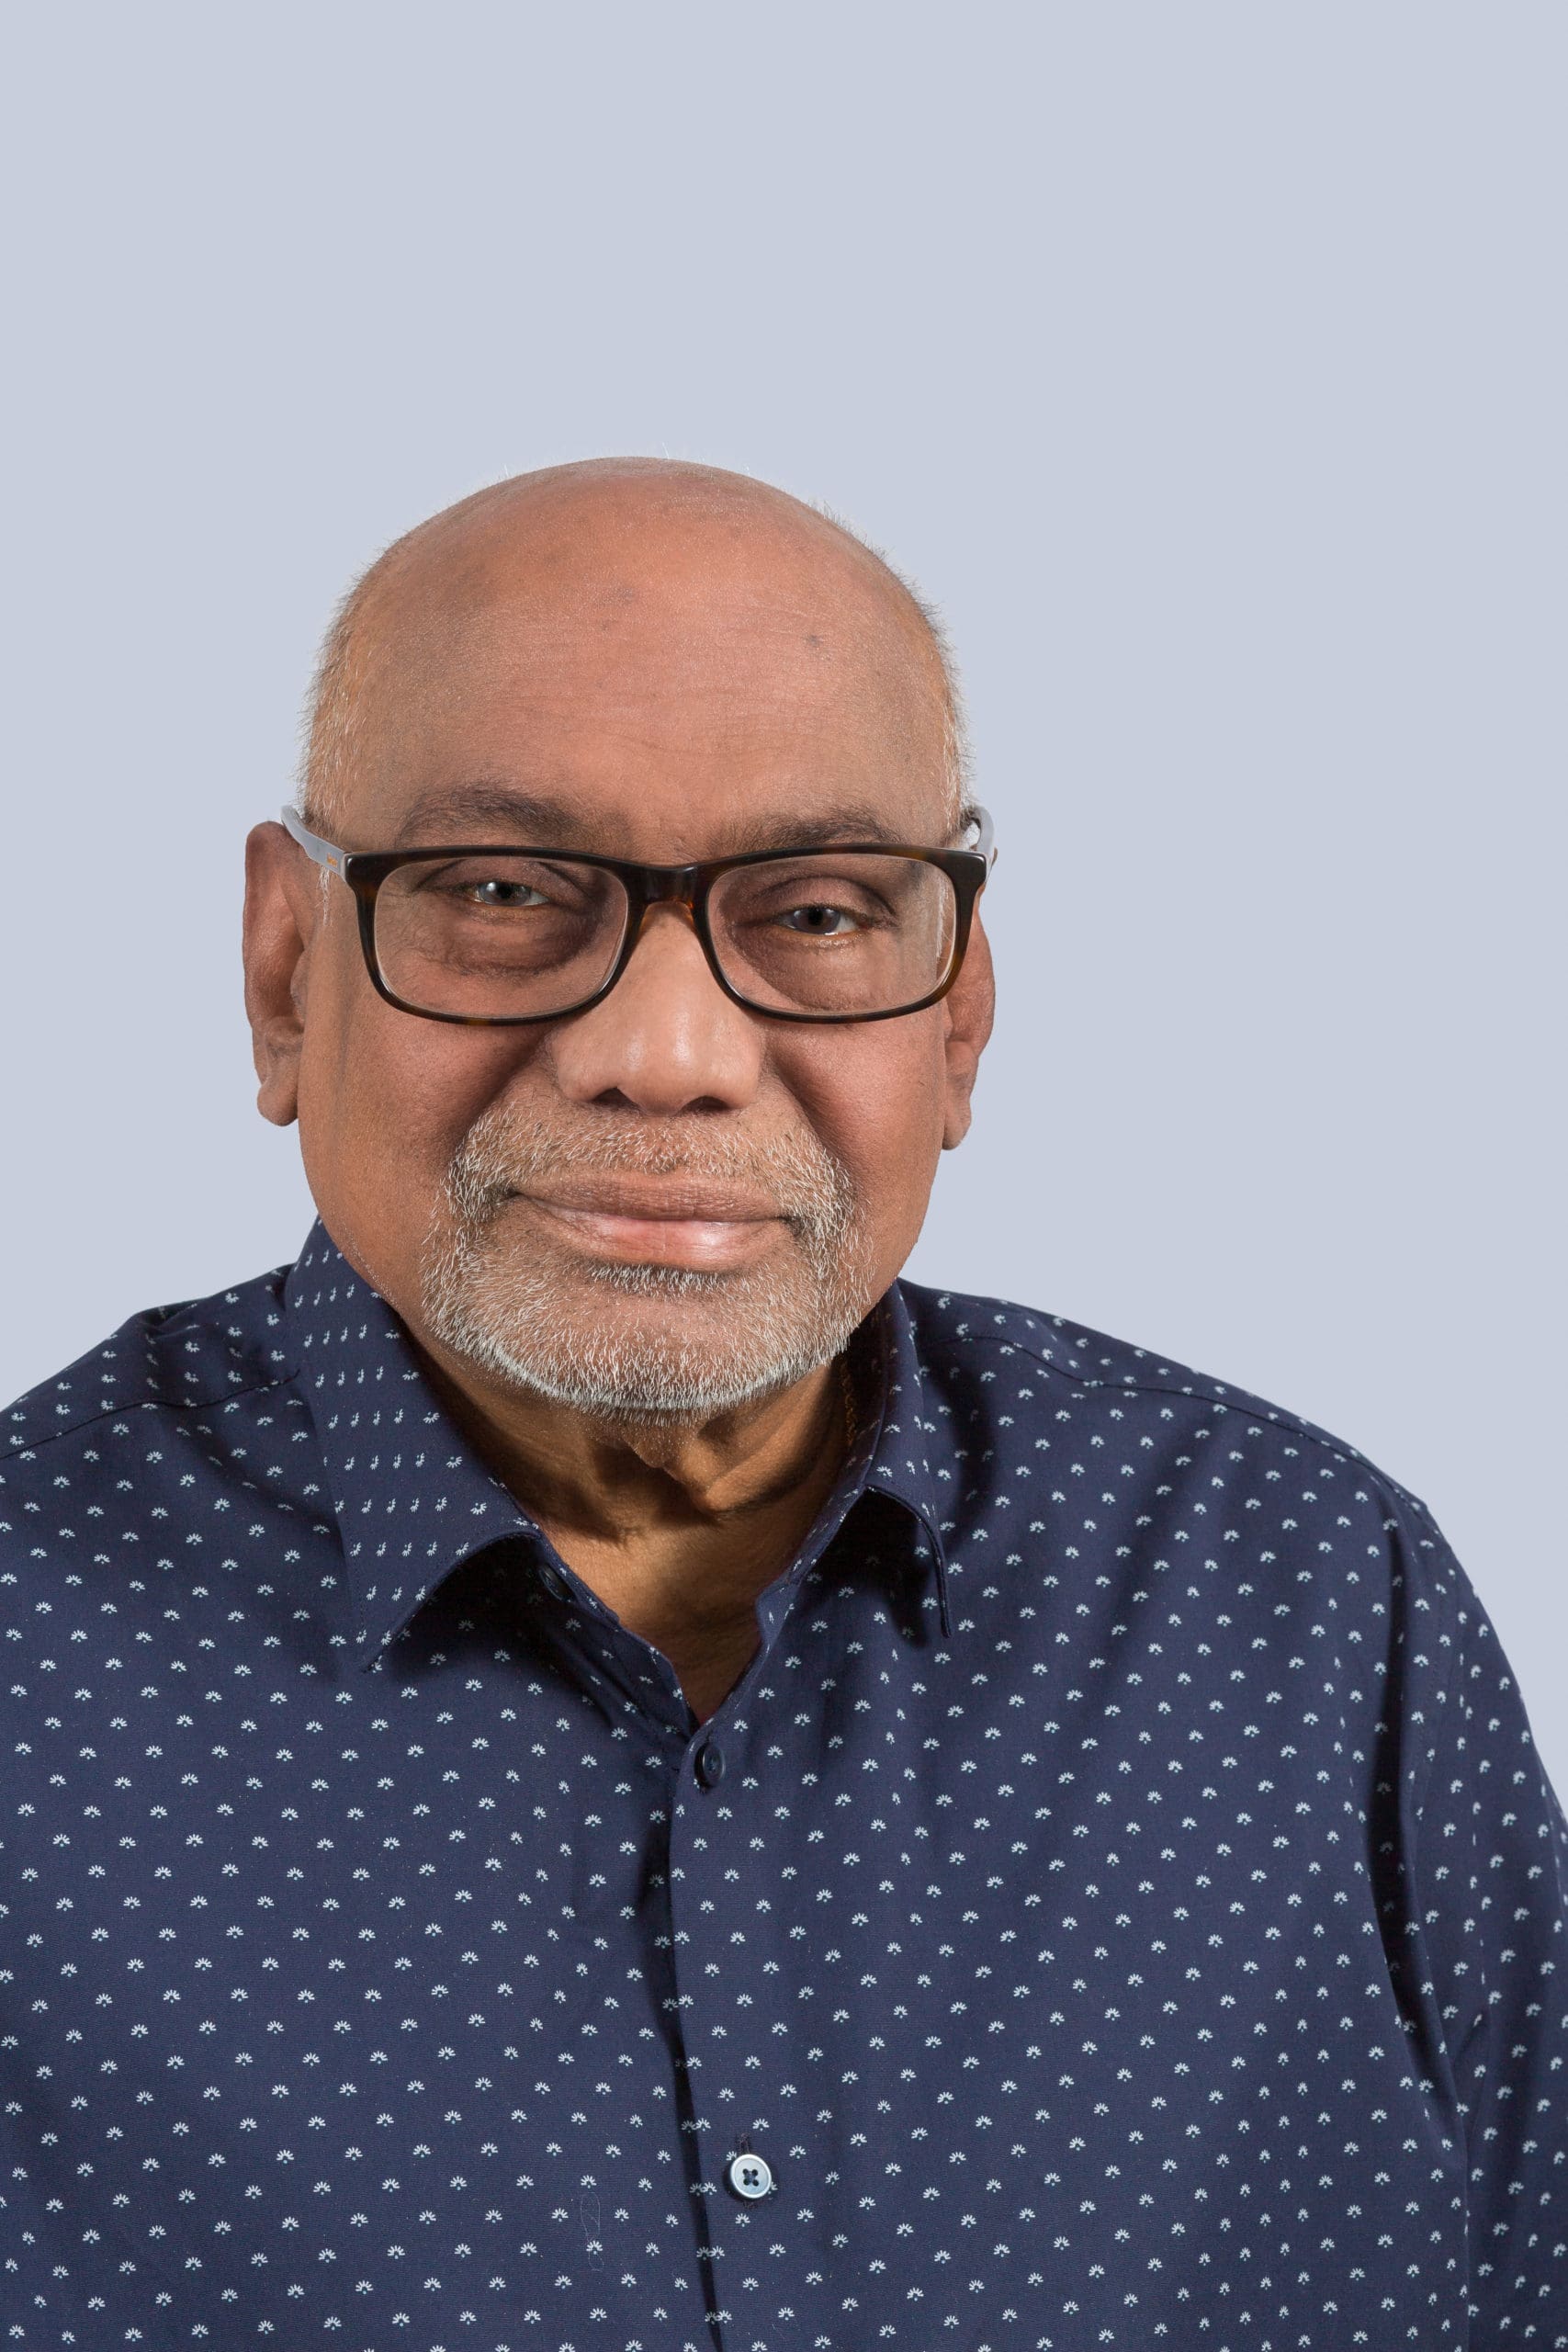 Muthu Govindarajah head shot - Aster Care provides care at home services in Portsmouth & the surrounding area for people with lifelong conditions & dementia.